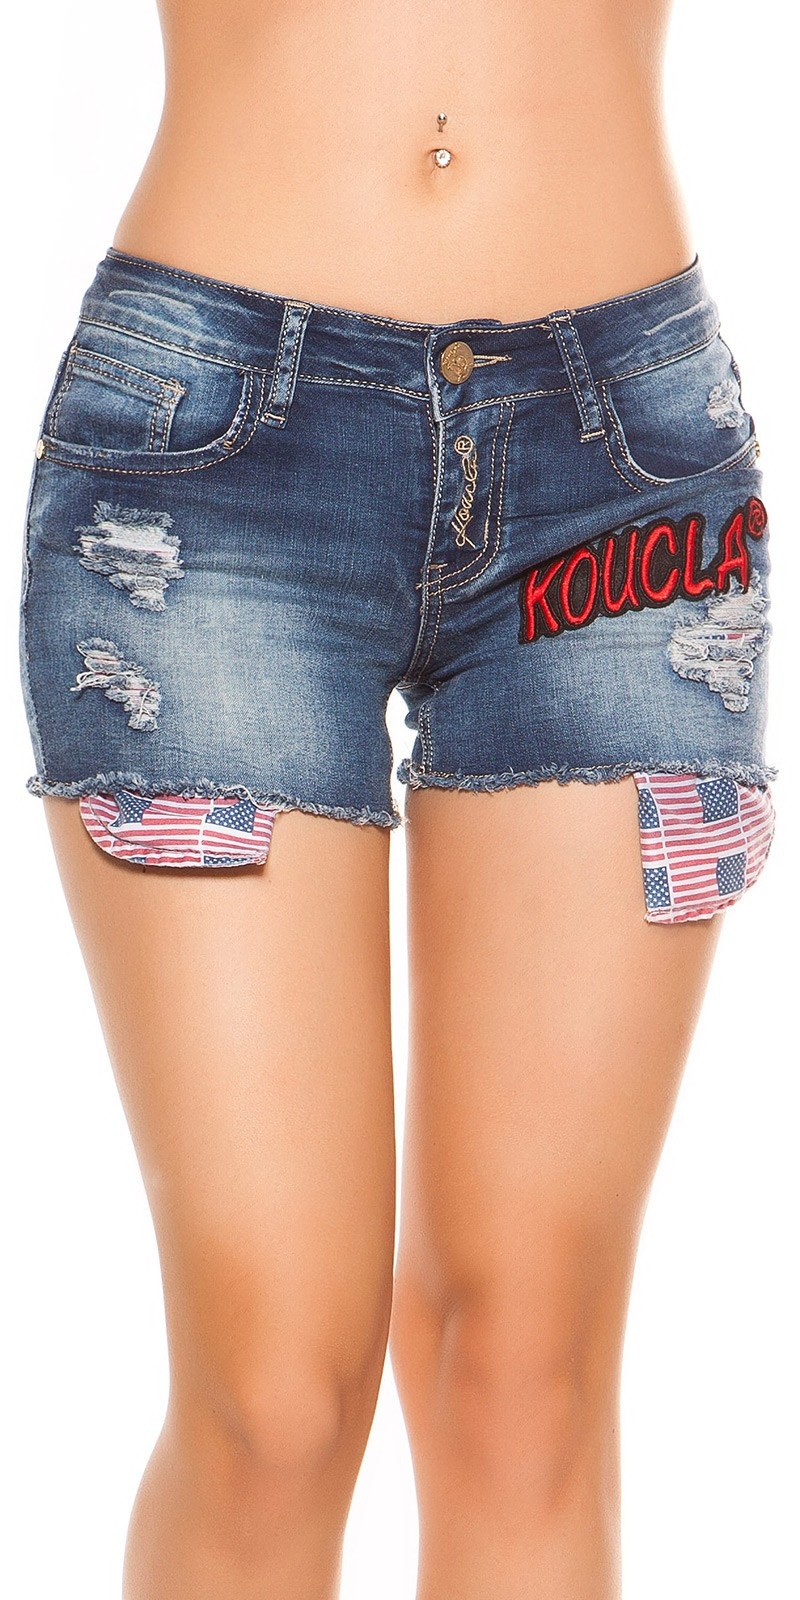 Sexy jeans shorts met patches jeansblauw